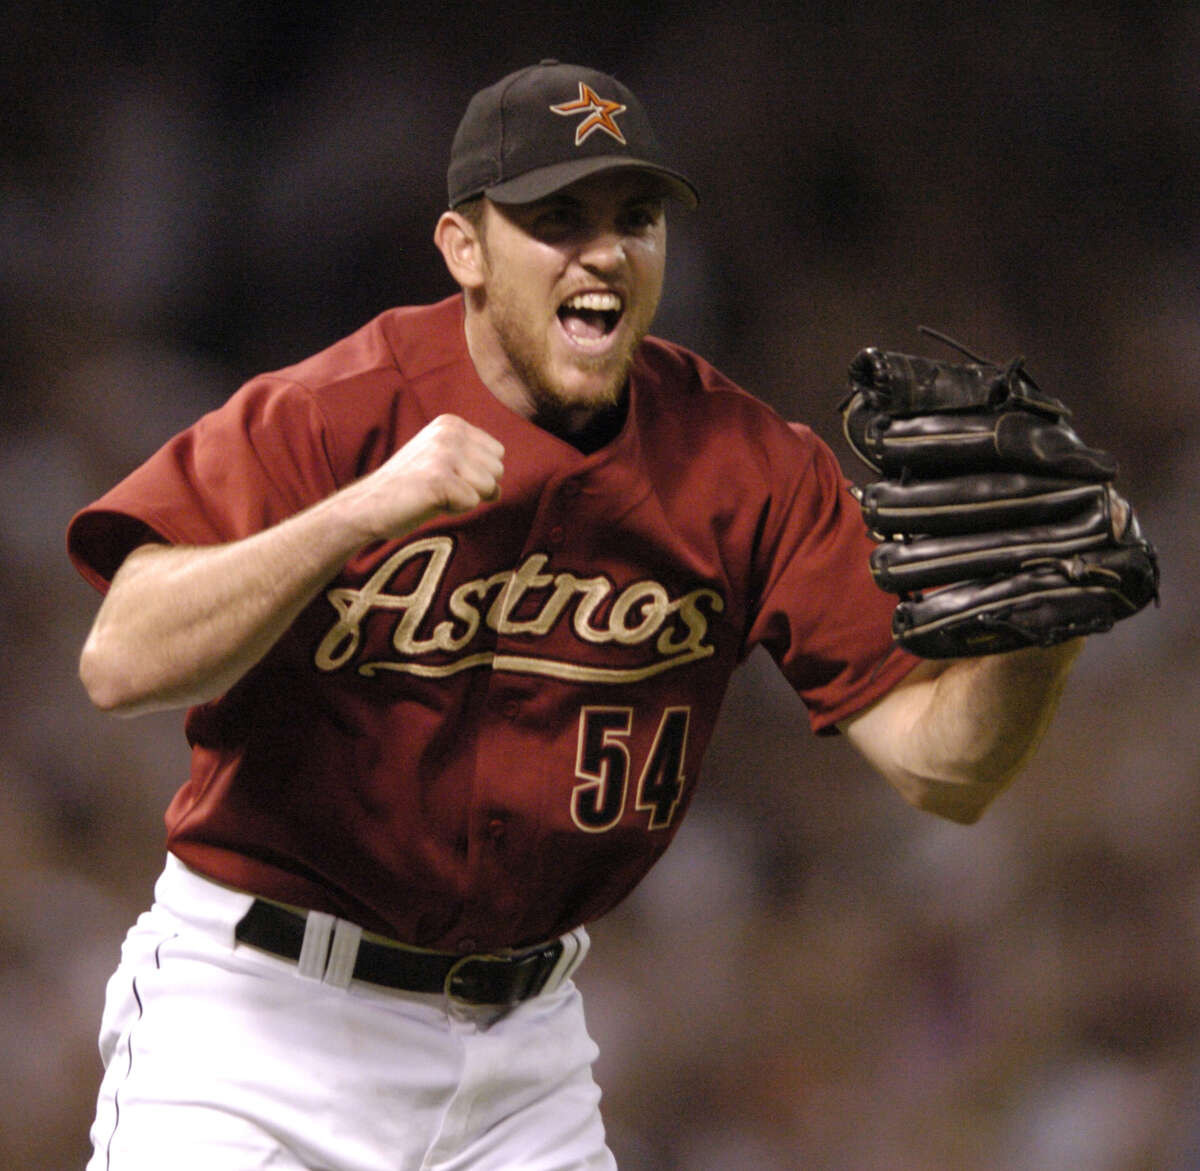 Brad Lidge helped pitch the Astros to the 2005 World Series, but the greatest success of his career was a perfect 2008 season with the Phillies that ended with a championship aprade.